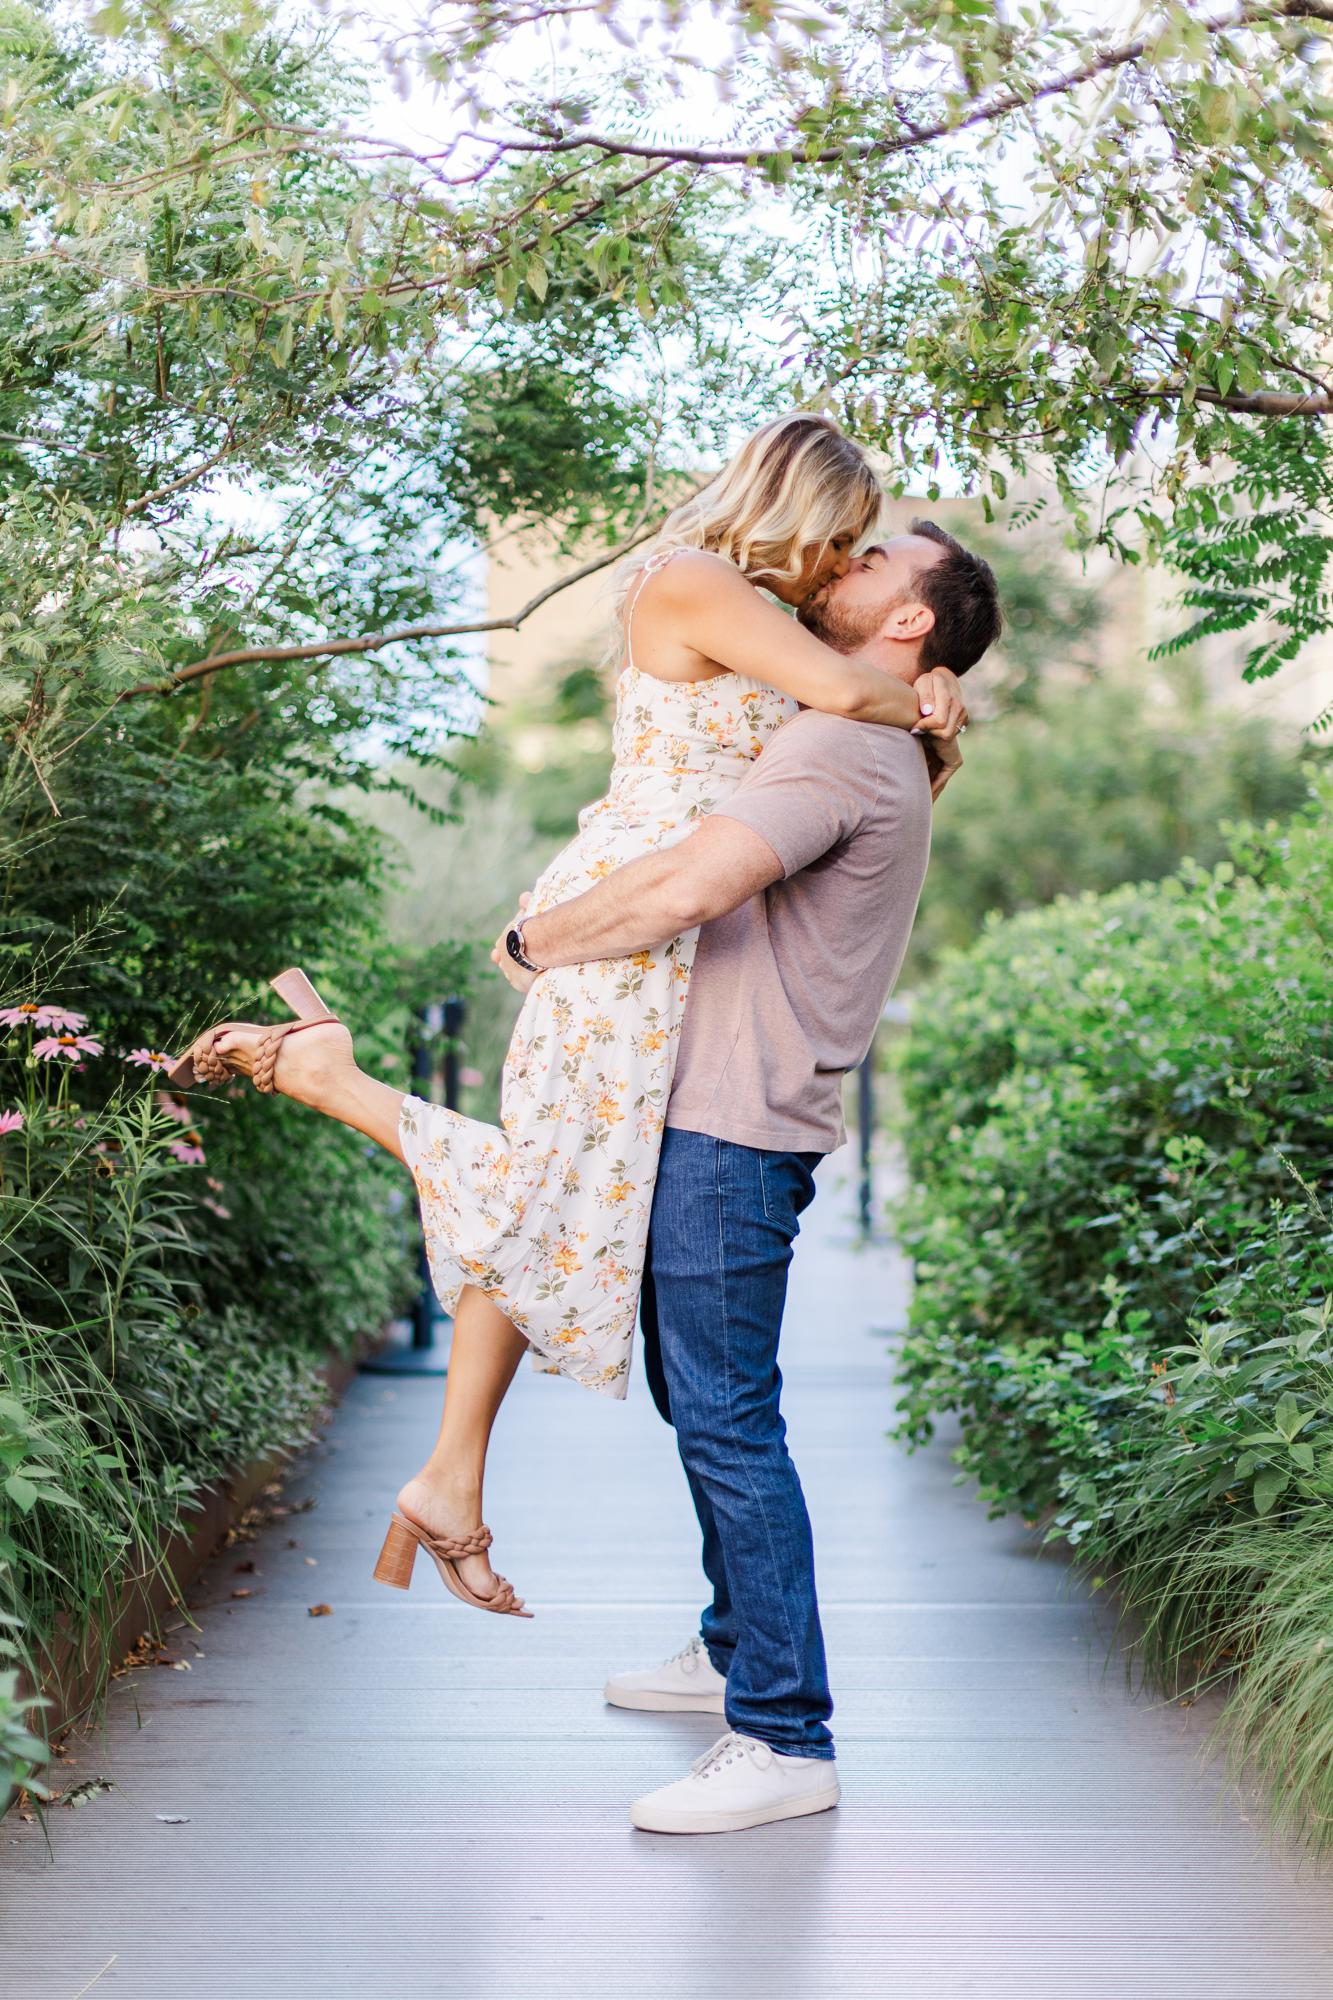 Playful Summer Engagement Shoot on the High Line